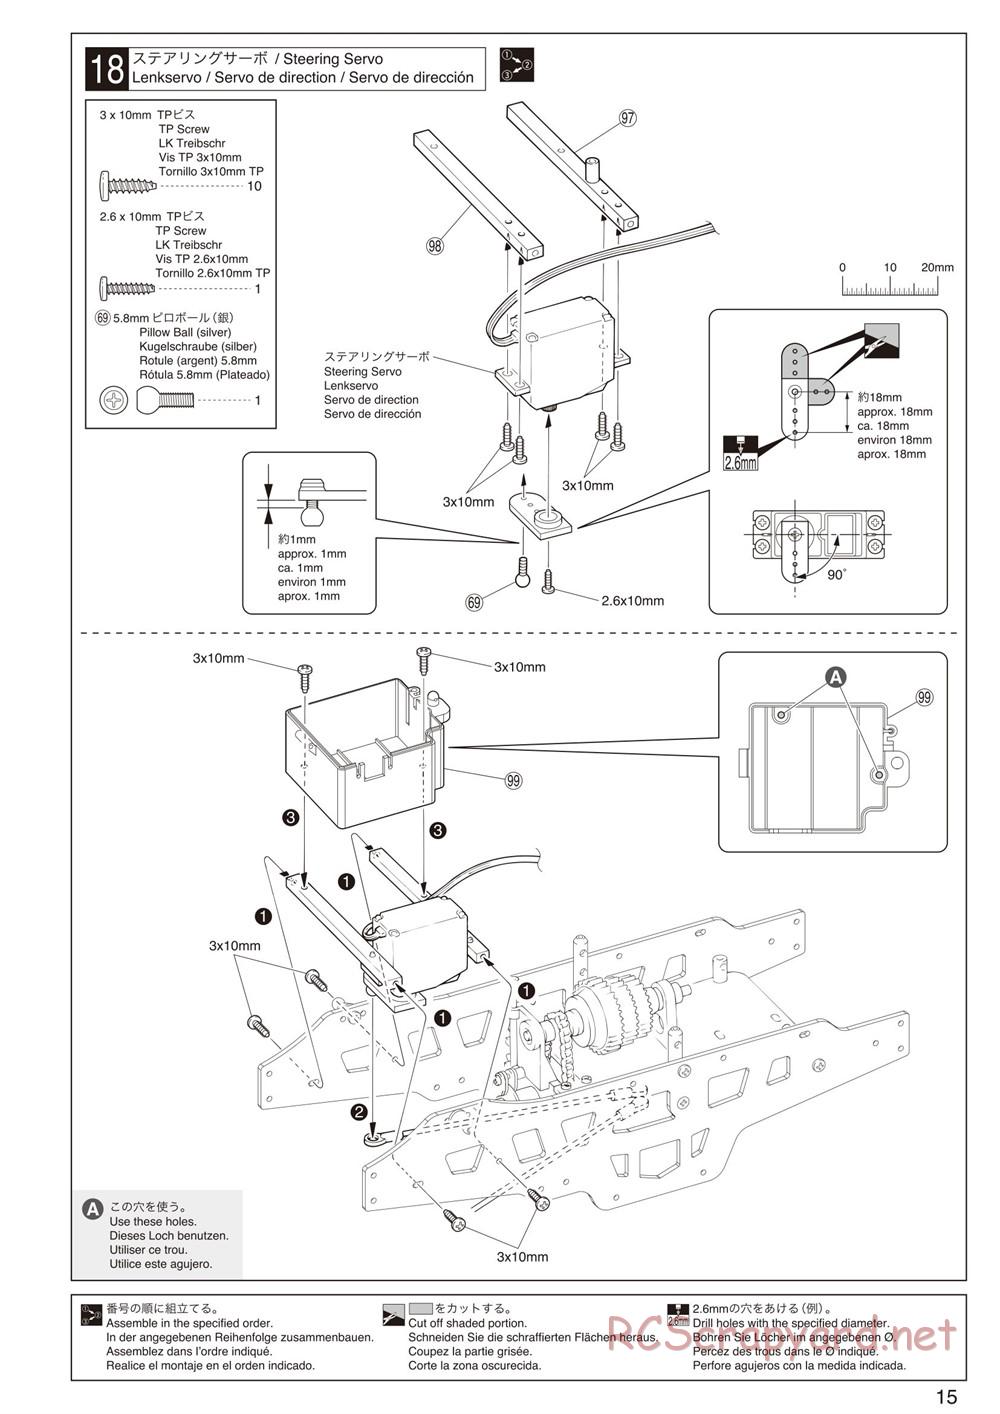 Kyosho - Mad Force Kruiser 2.0 - Manual - Page 15